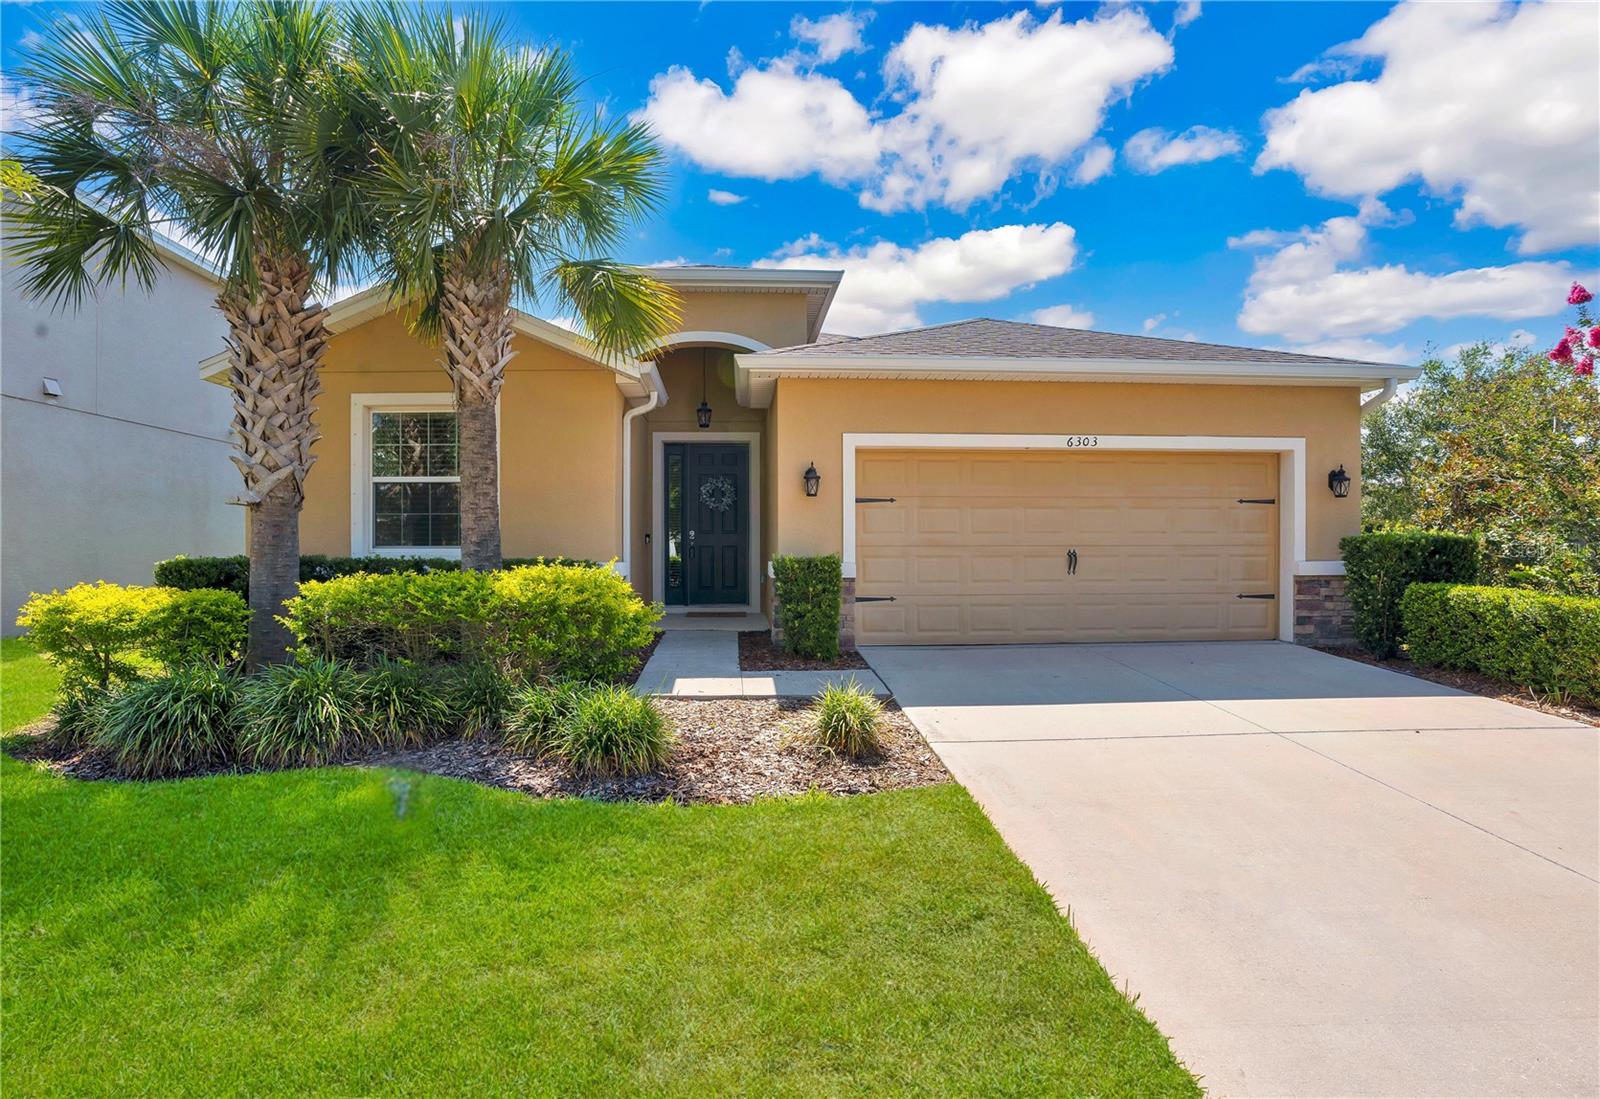 Welcome to 6303 Sunsail Place in Apollo Beach